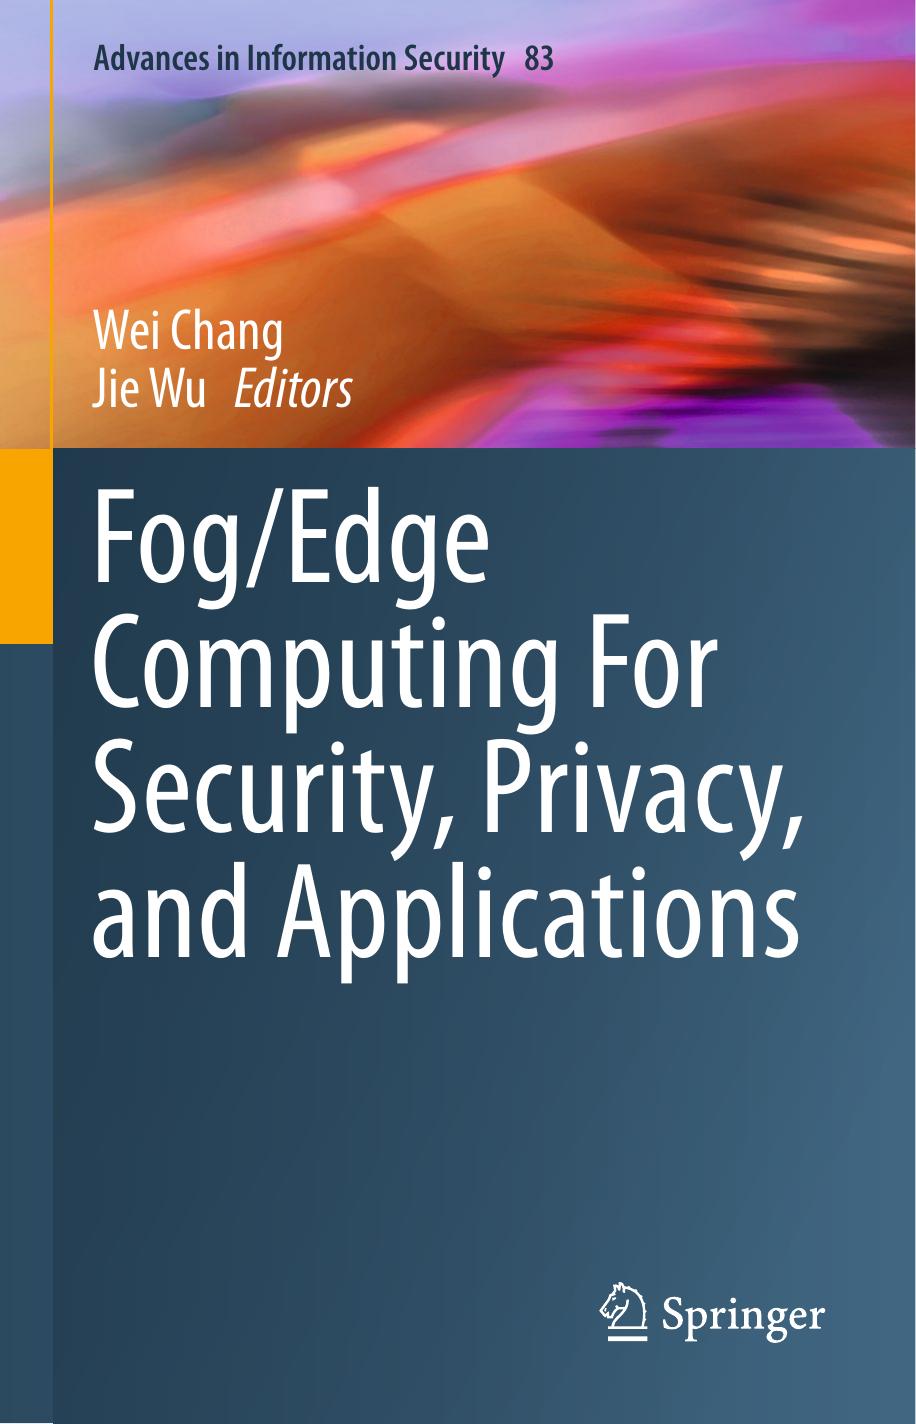 Fog/Edge Computing for Security, Privacy, and Applications